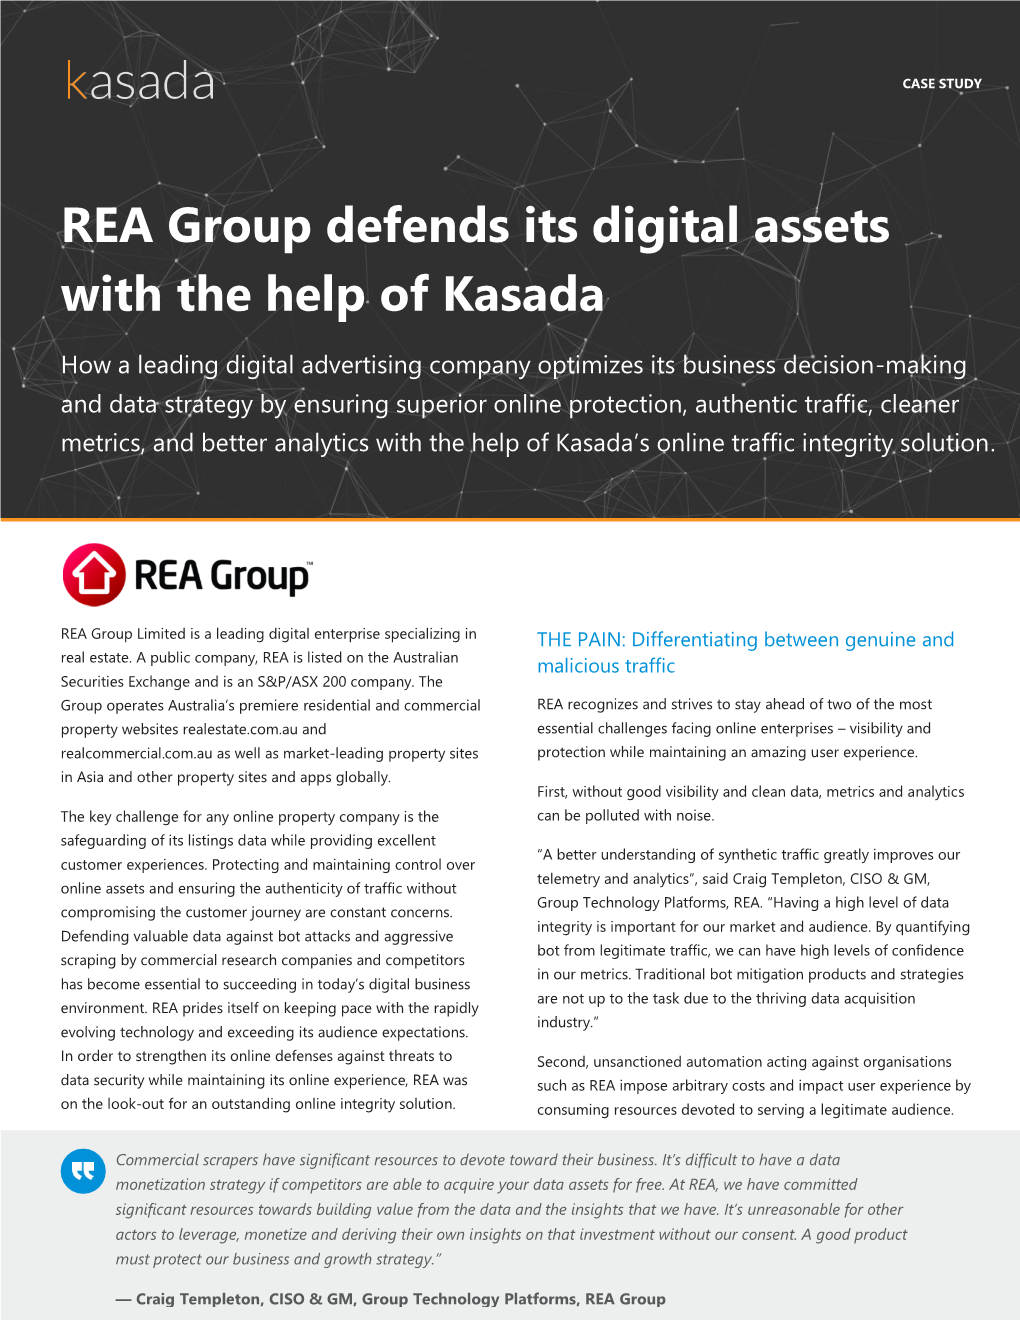 REA Group Defends Its Digital Assets with the Help of Kasada